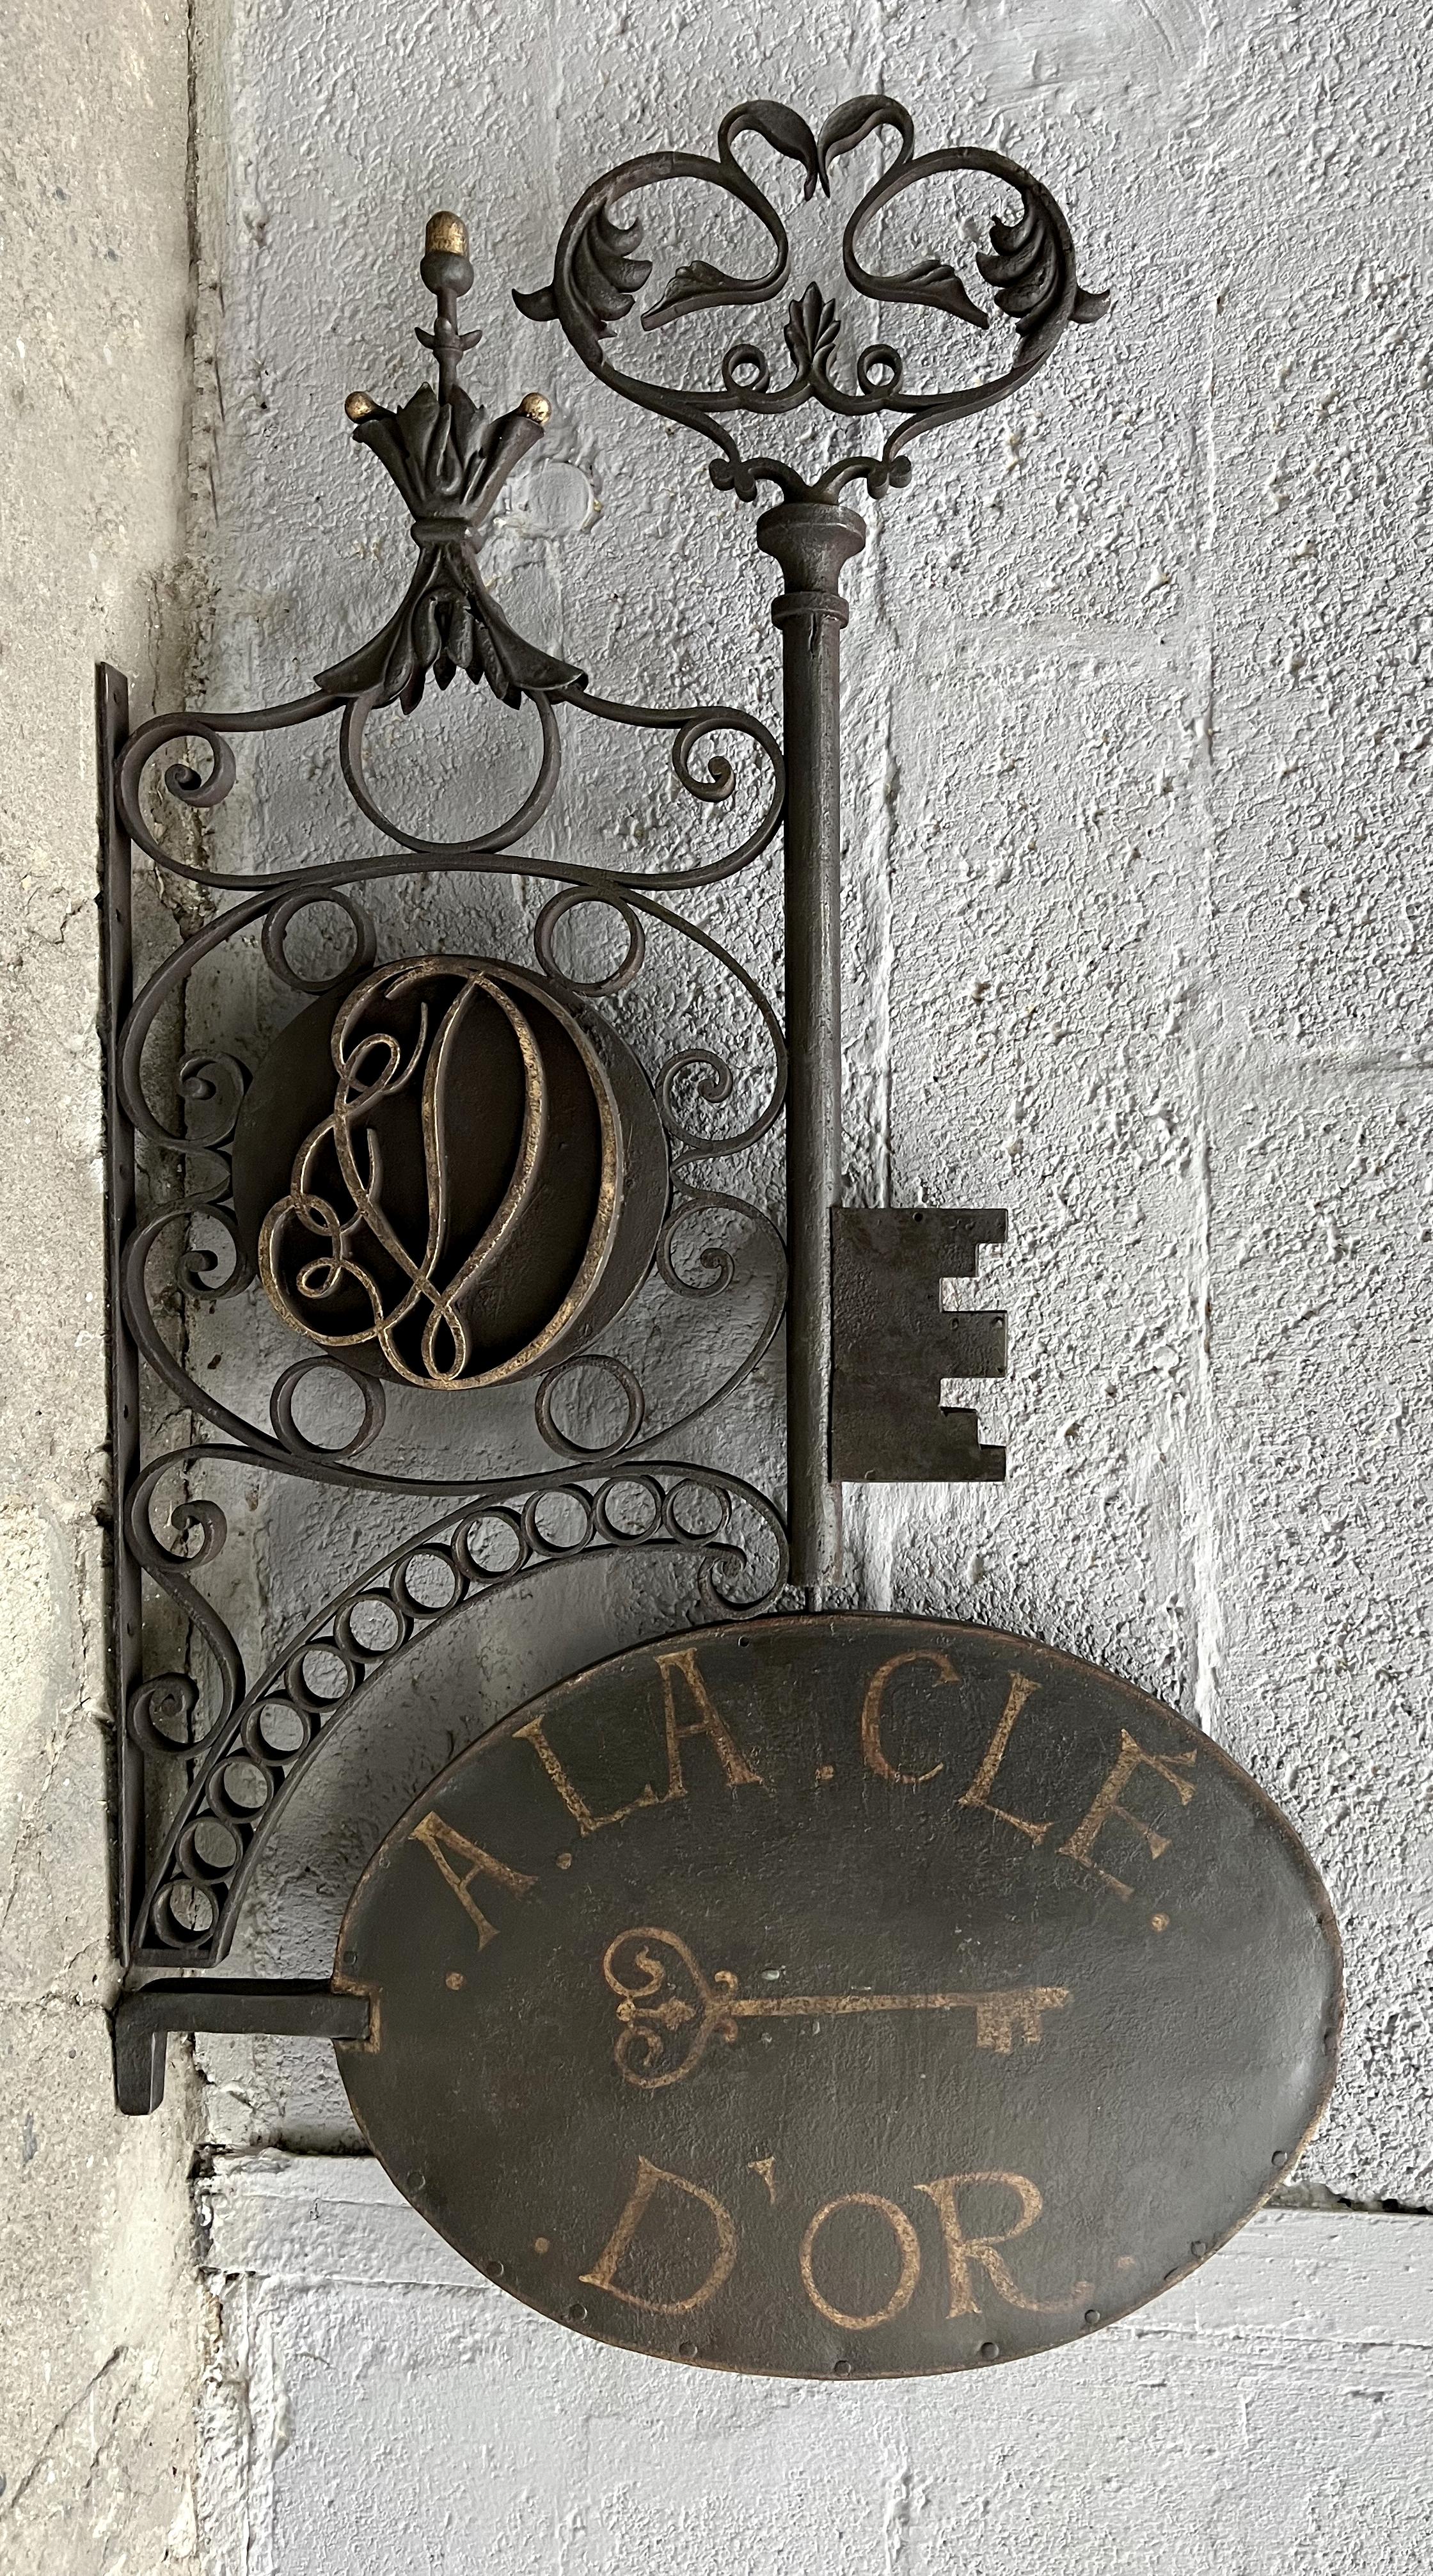 Beautiful wrought-iron locksmith's sign, hand-crafted in France on the first part of the 19th century. It's entirely double-sided, in finely worked wrought iron. The part under the key bears forged initials and the sign itself, in shaped sheet iron,